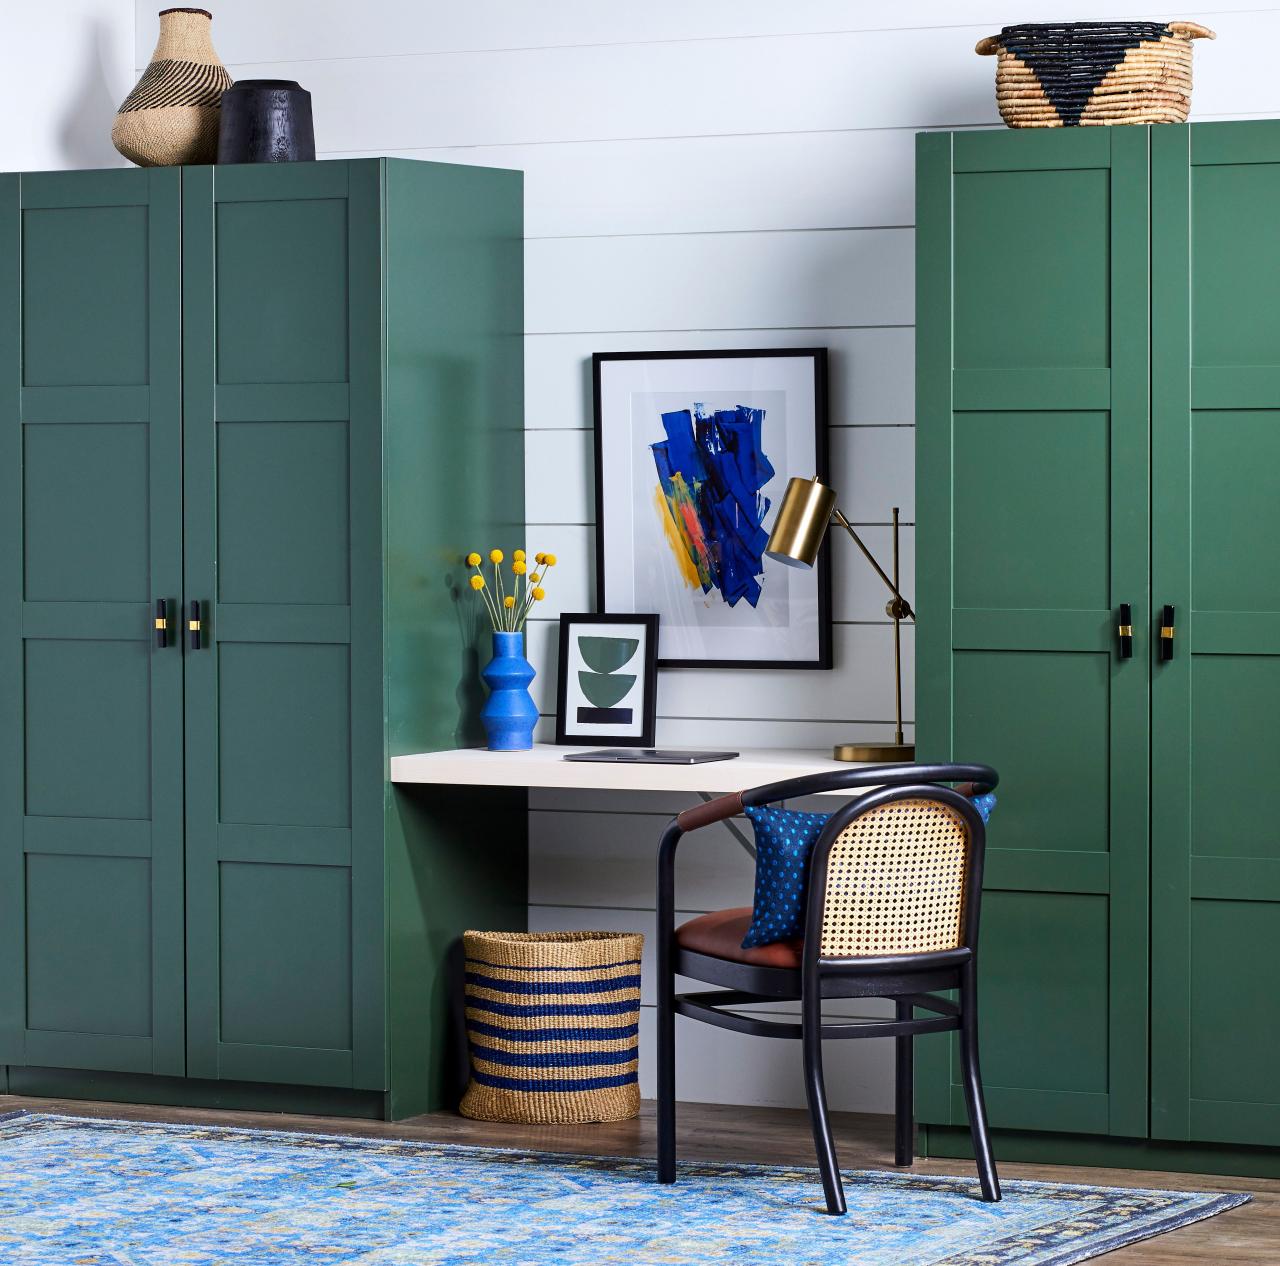 How to Use IKEA Furniture for Built-In Storage